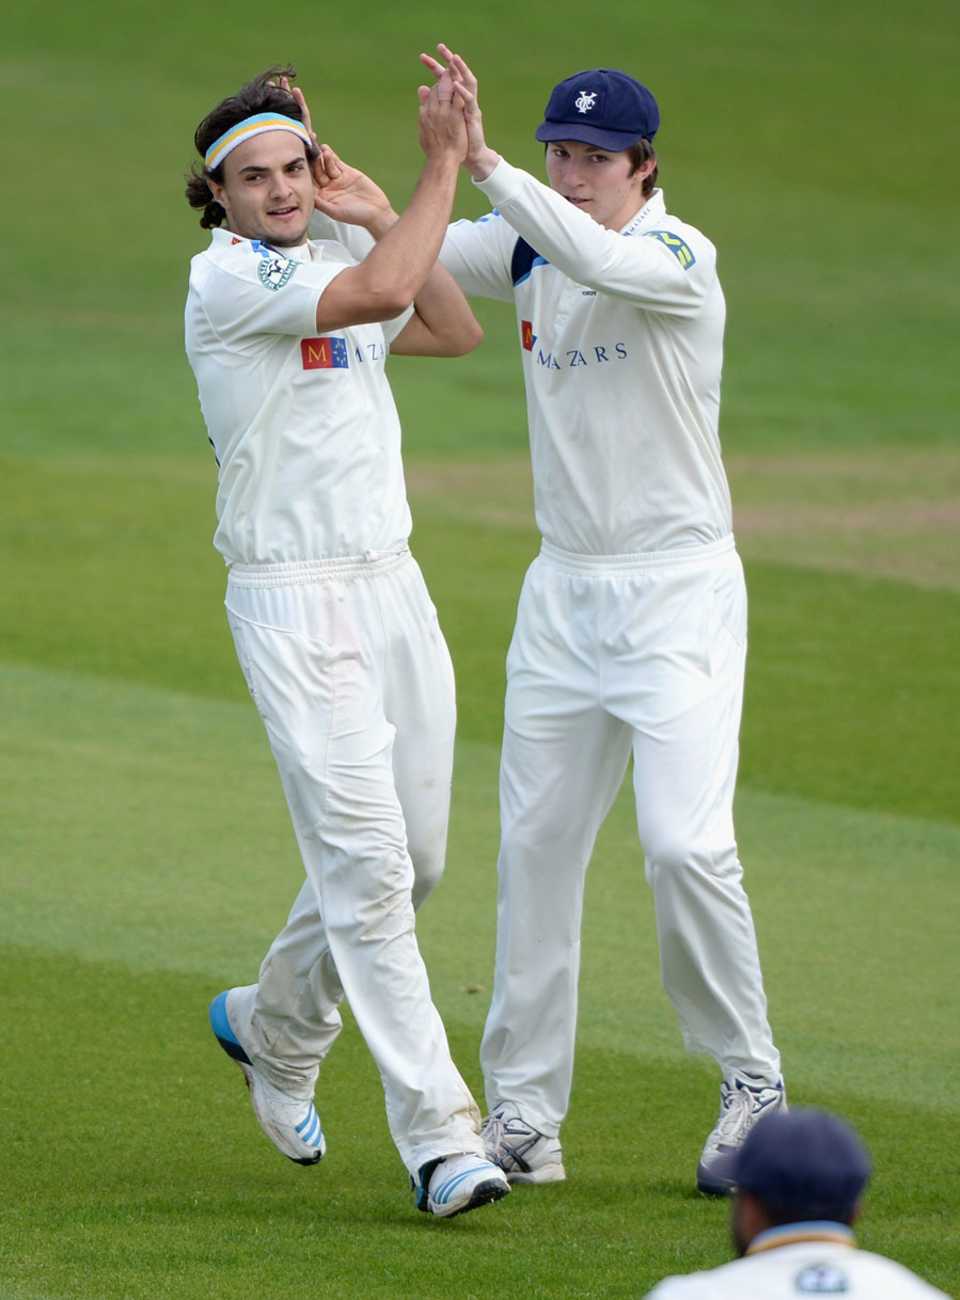 Jack Brooks claimed career-best match figures against his former county